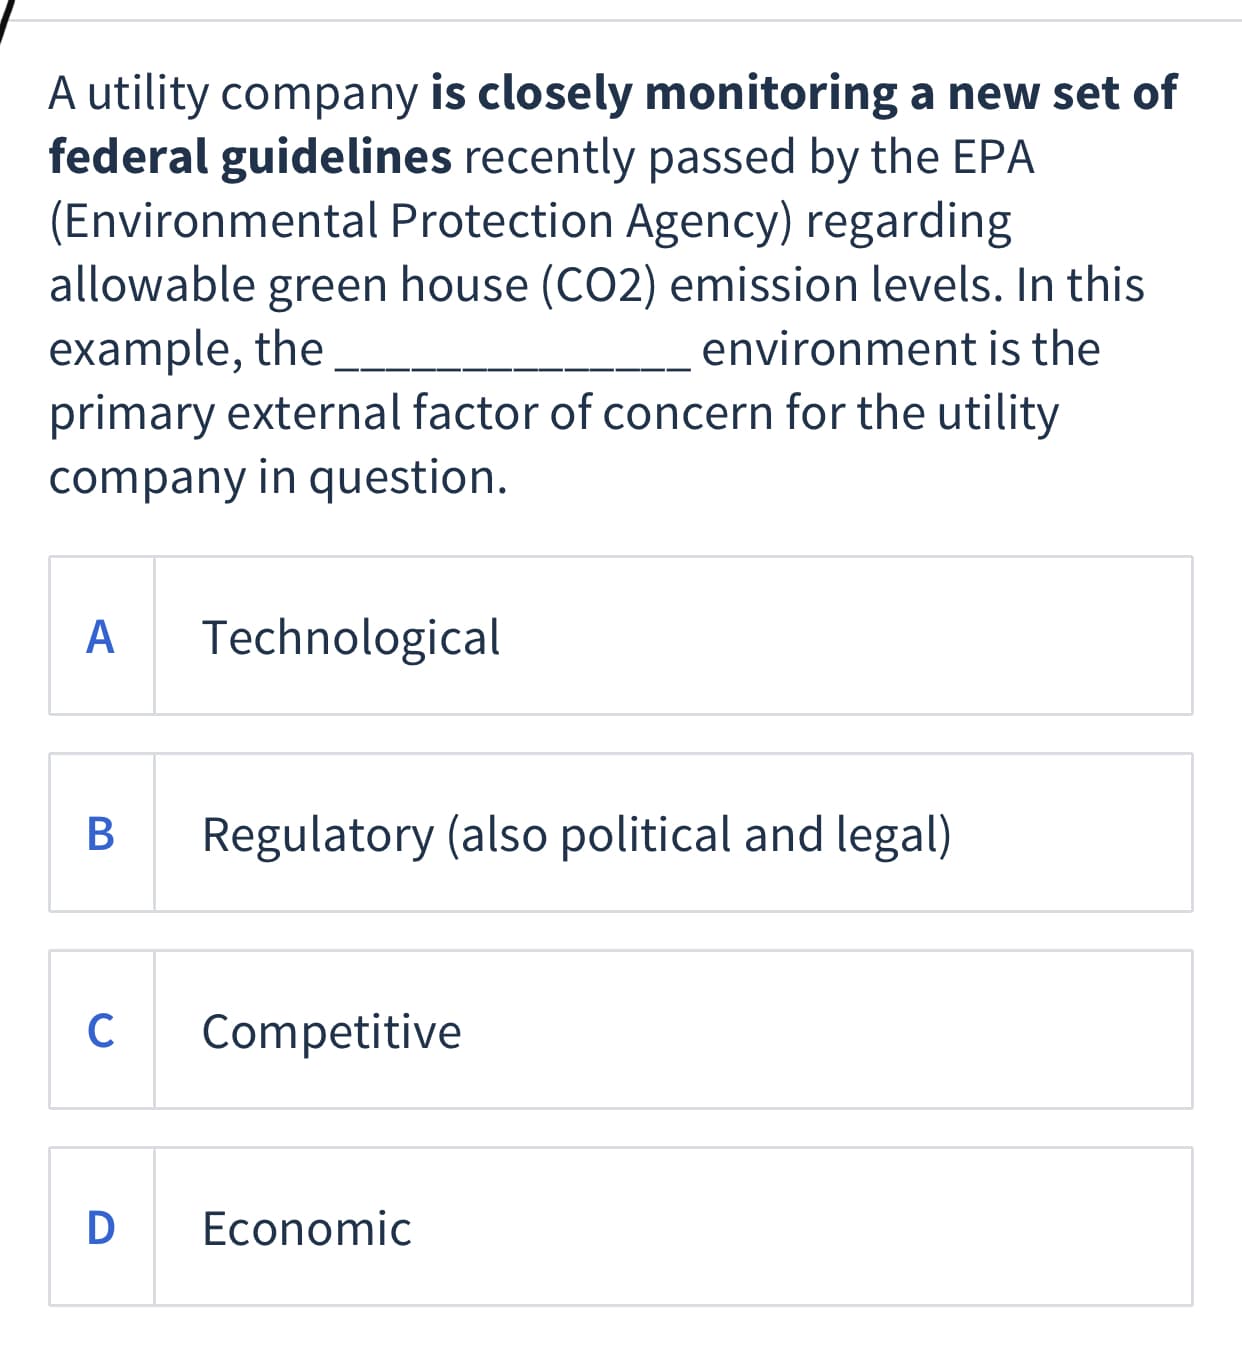 A utility company is closely monitoring a new set of
federal guidelines recently passed by the EPA
(Environmental Protection Agency) regarding
allowable green house (CO2) emission levels. In this
example, the
primary external factor of concern for the utility
company in question.
environment is the
A
Technological
Regulatory (also political and legal)
C
Competitive
D
Economic
